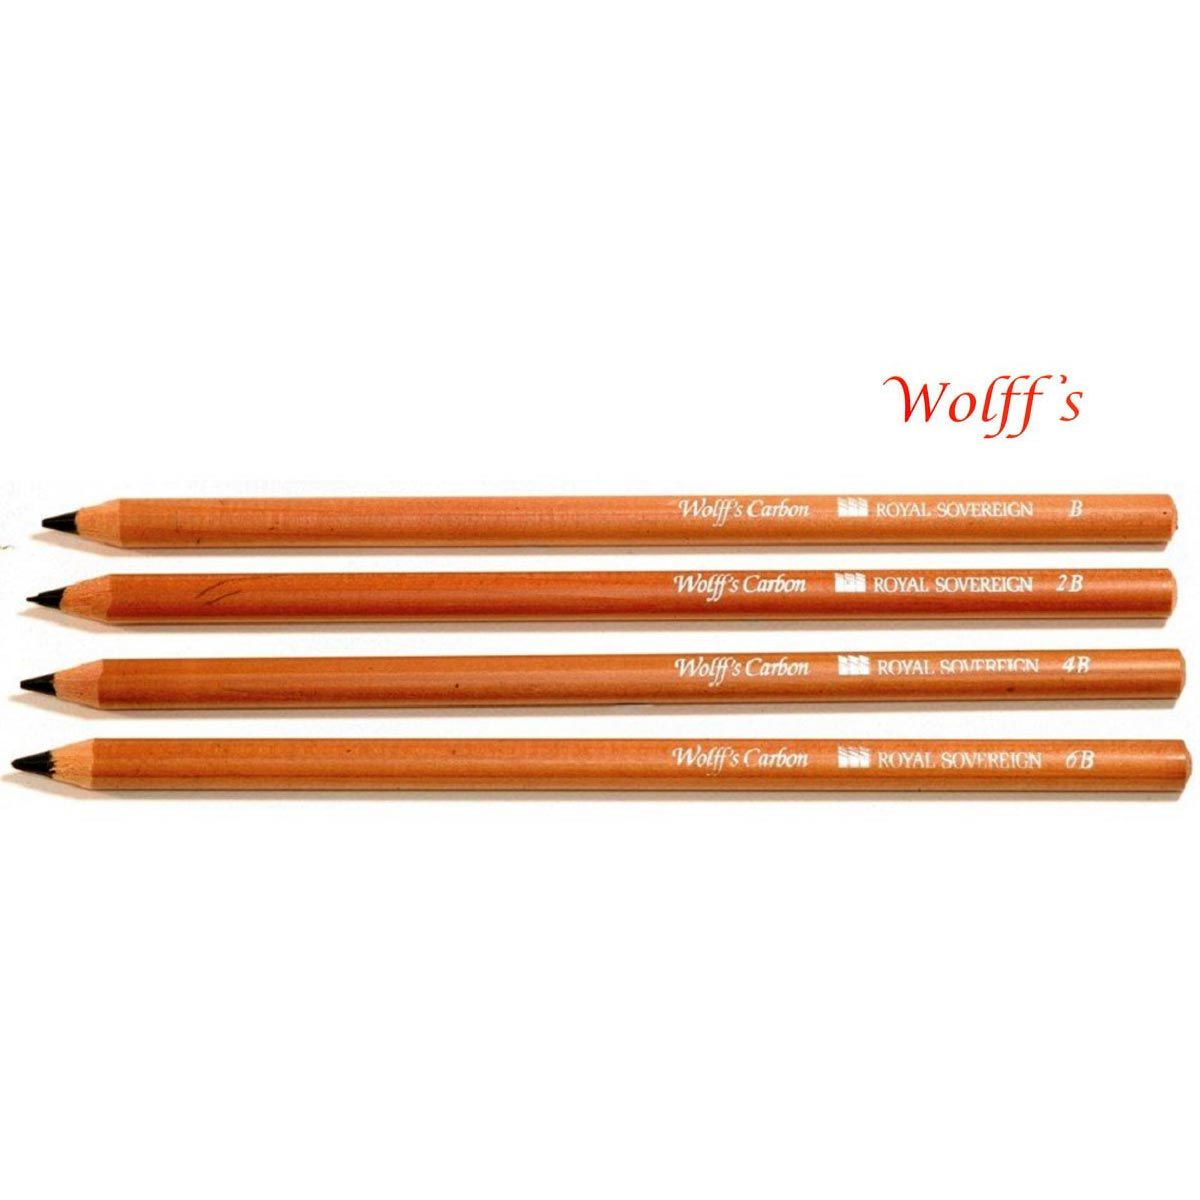 Wolff’s Carbon Pencil Open Stock